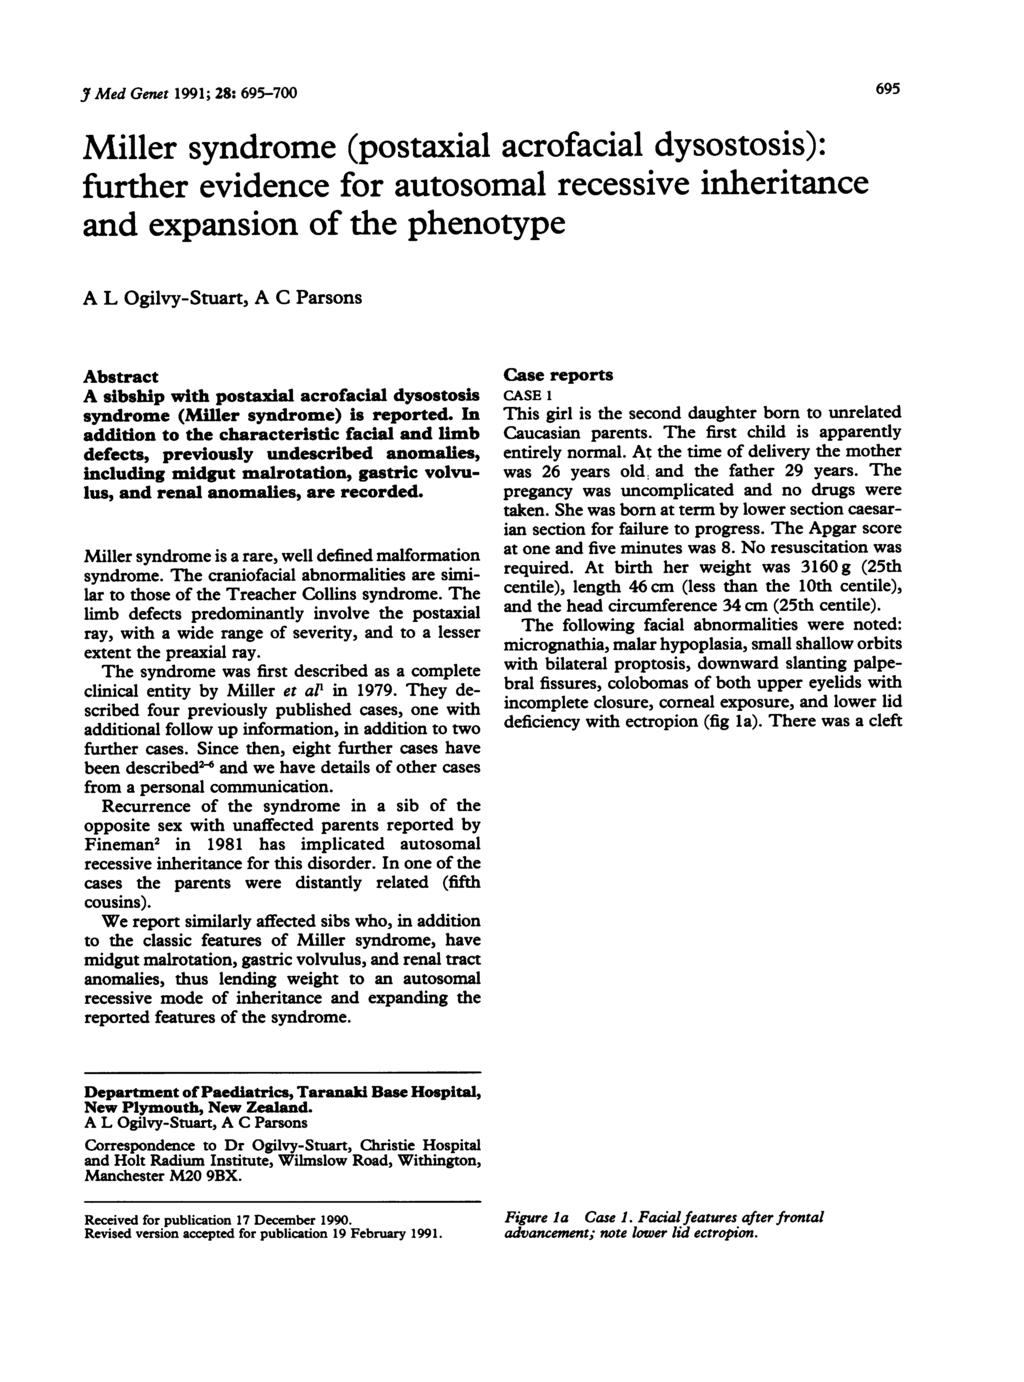 J Med Genet 1991; 28: 695-700 Miller syndrome (postaxial acrofacial dysostosis): further evidence for autosomal recessive inheritance and expansion of the phenotype A L Ogilvy-Stuart, A C Parsons